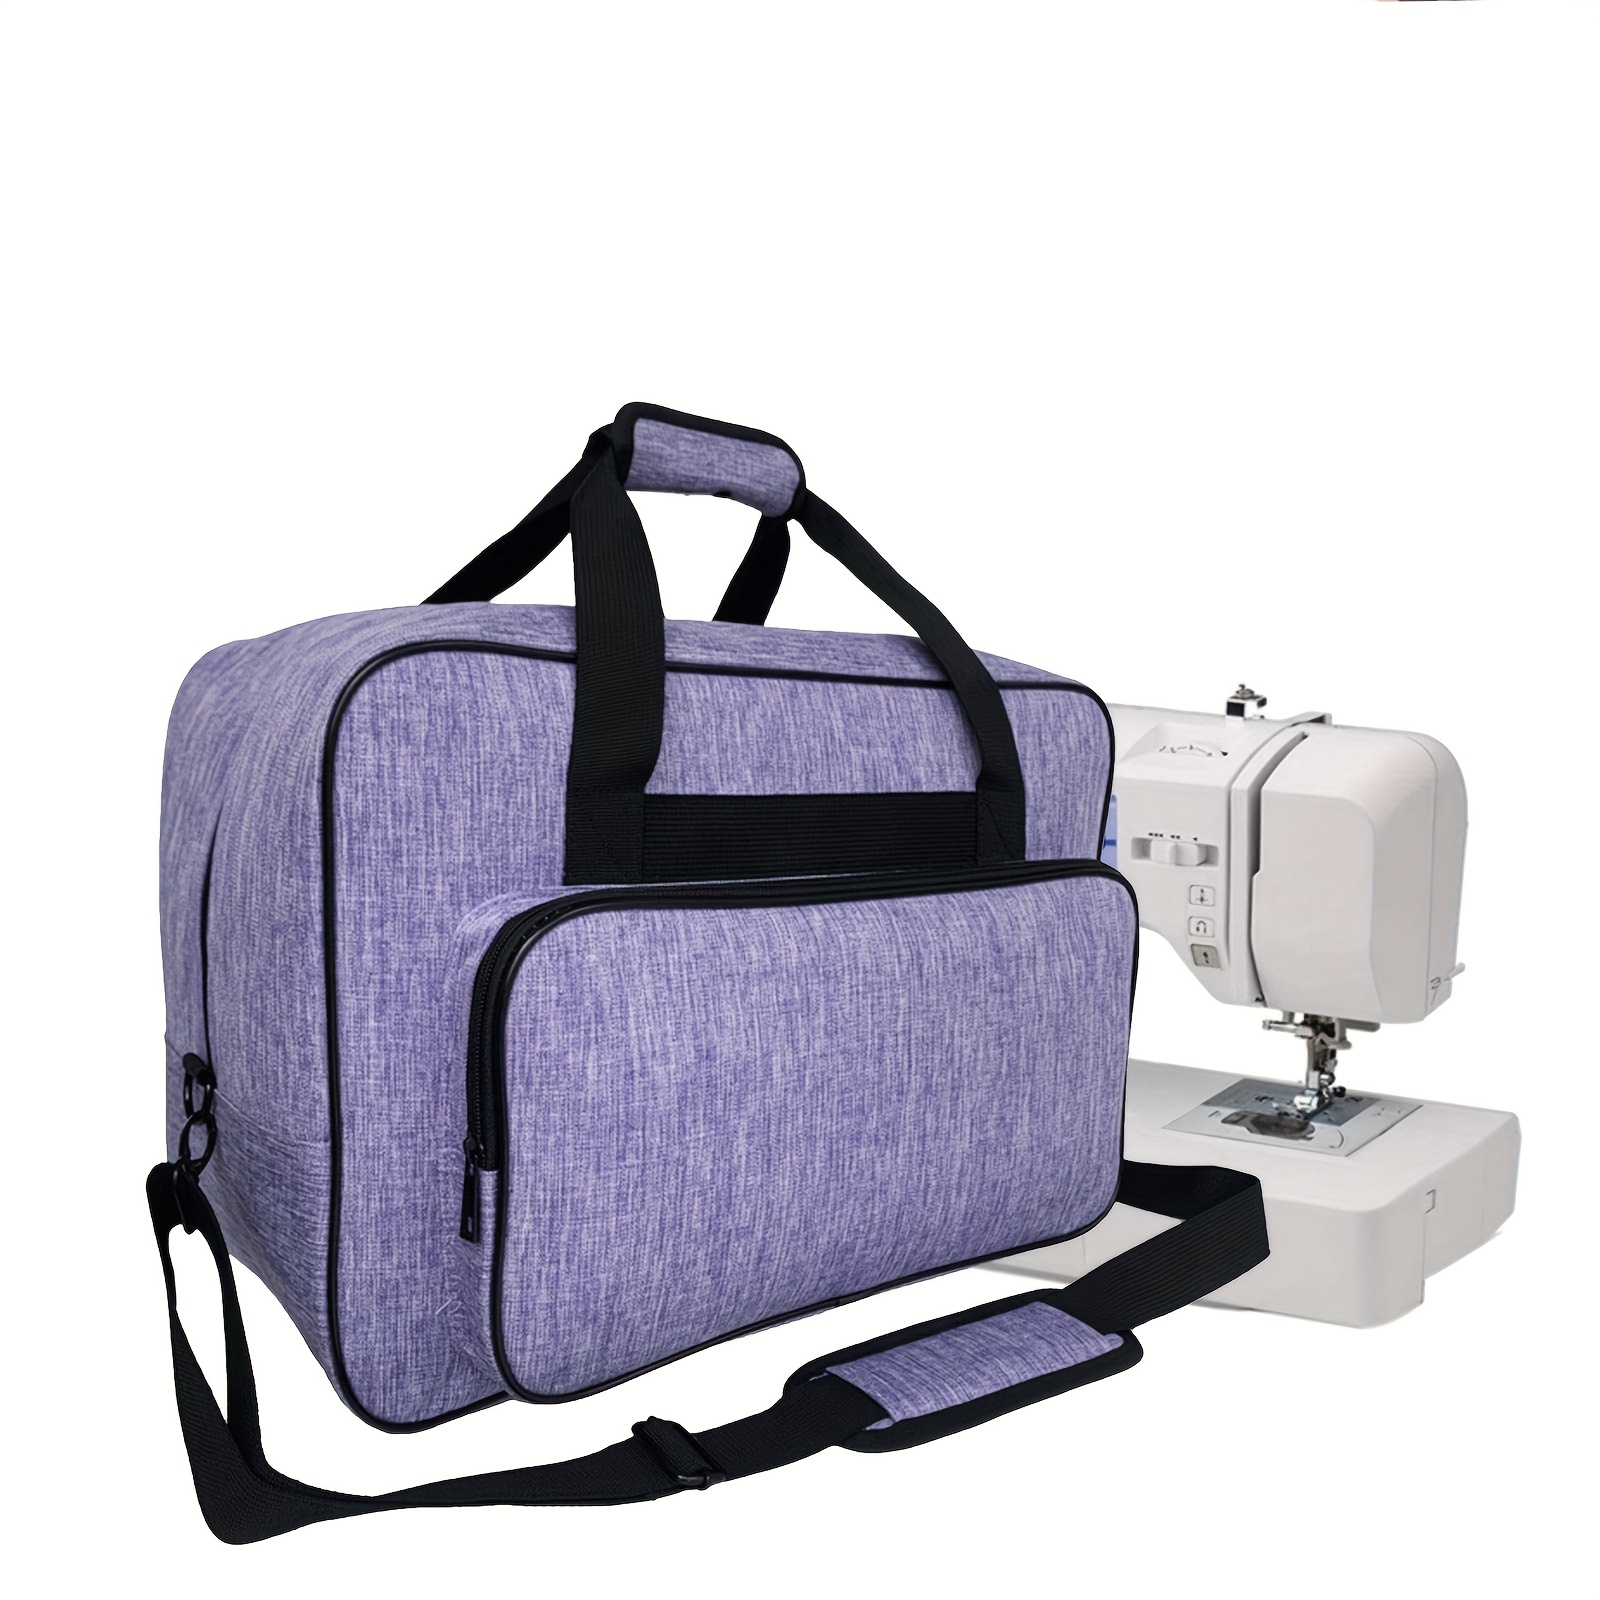 Large Sewing Machine Case Oxford Cloth Travel for Outrdoors Sew